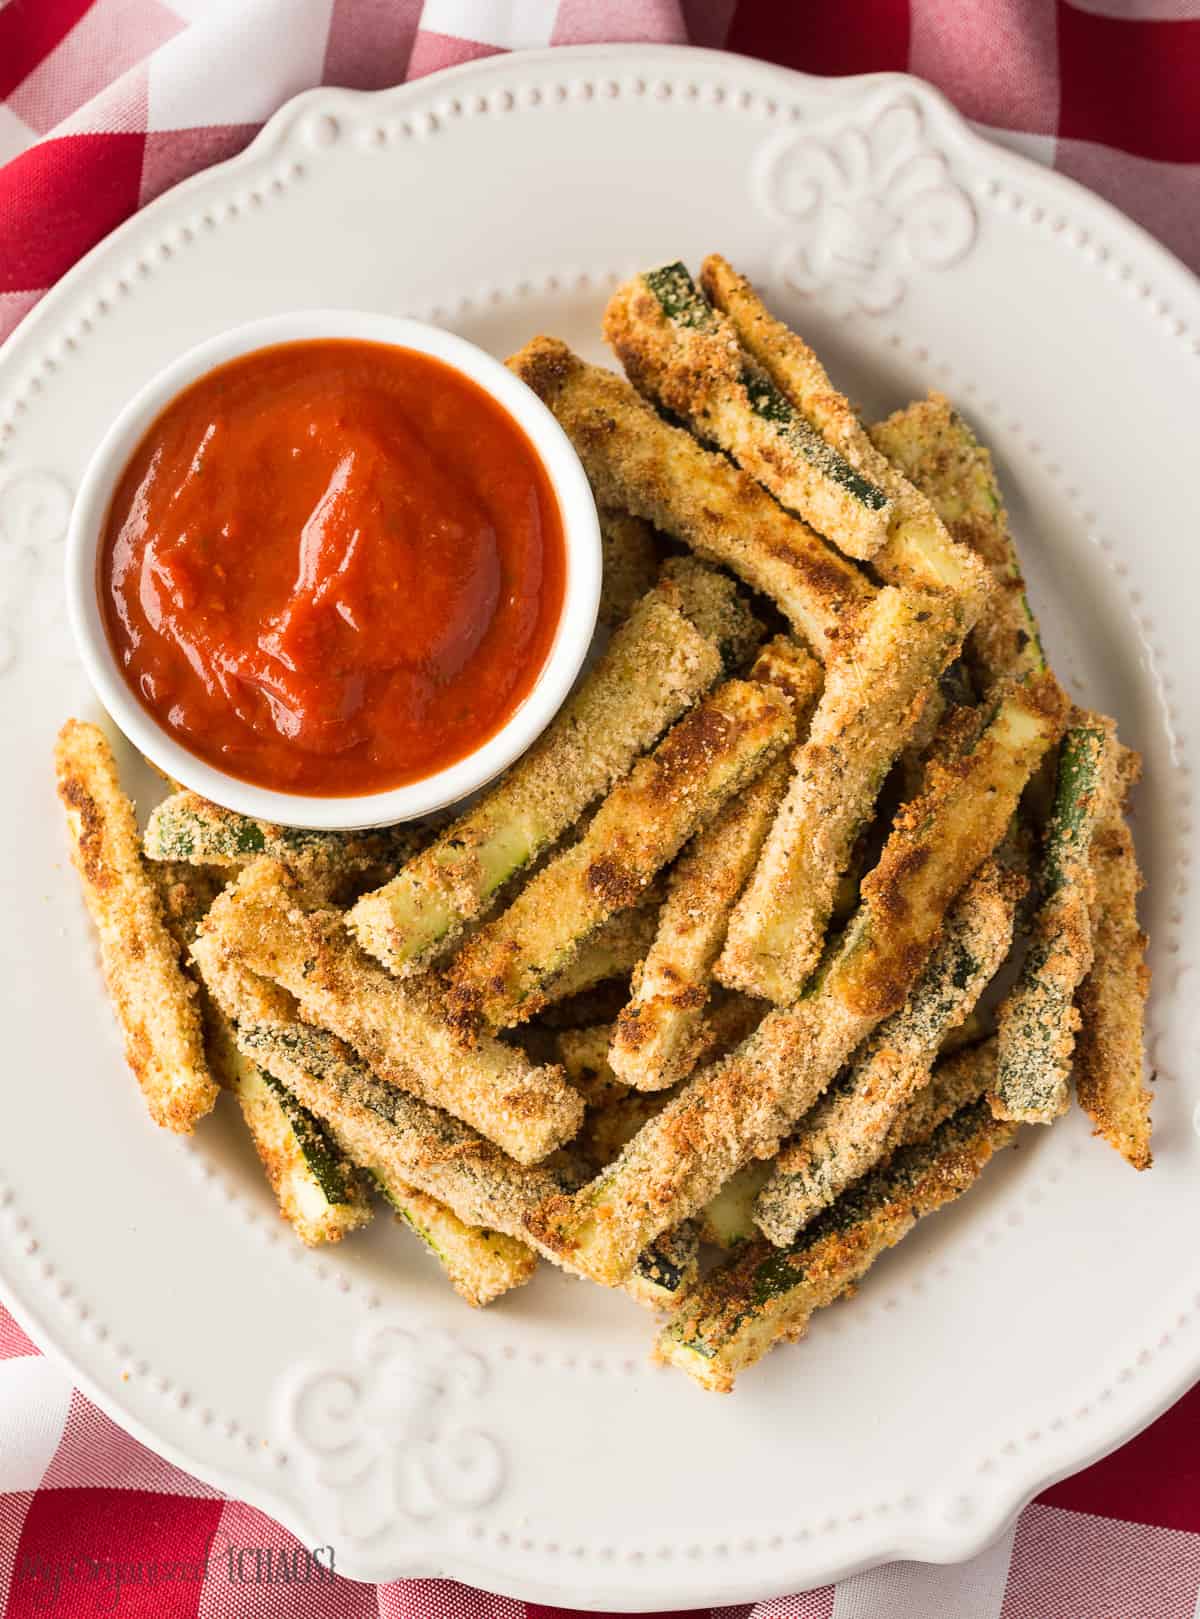 Baked Zucchini Fries from My Organized Chaos